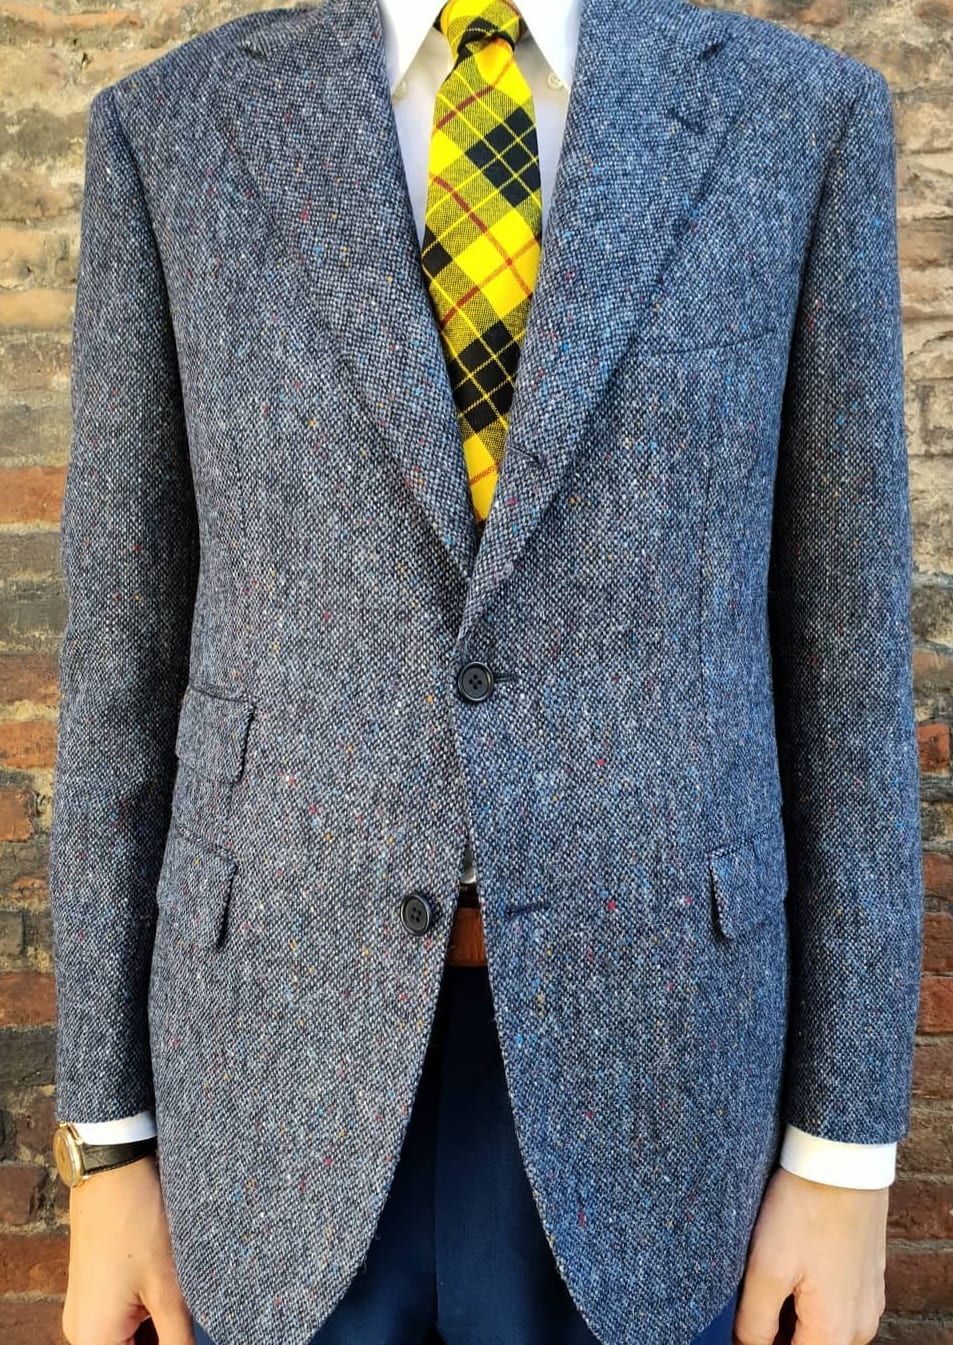 Tweed Blue Jacket Outfit for Men